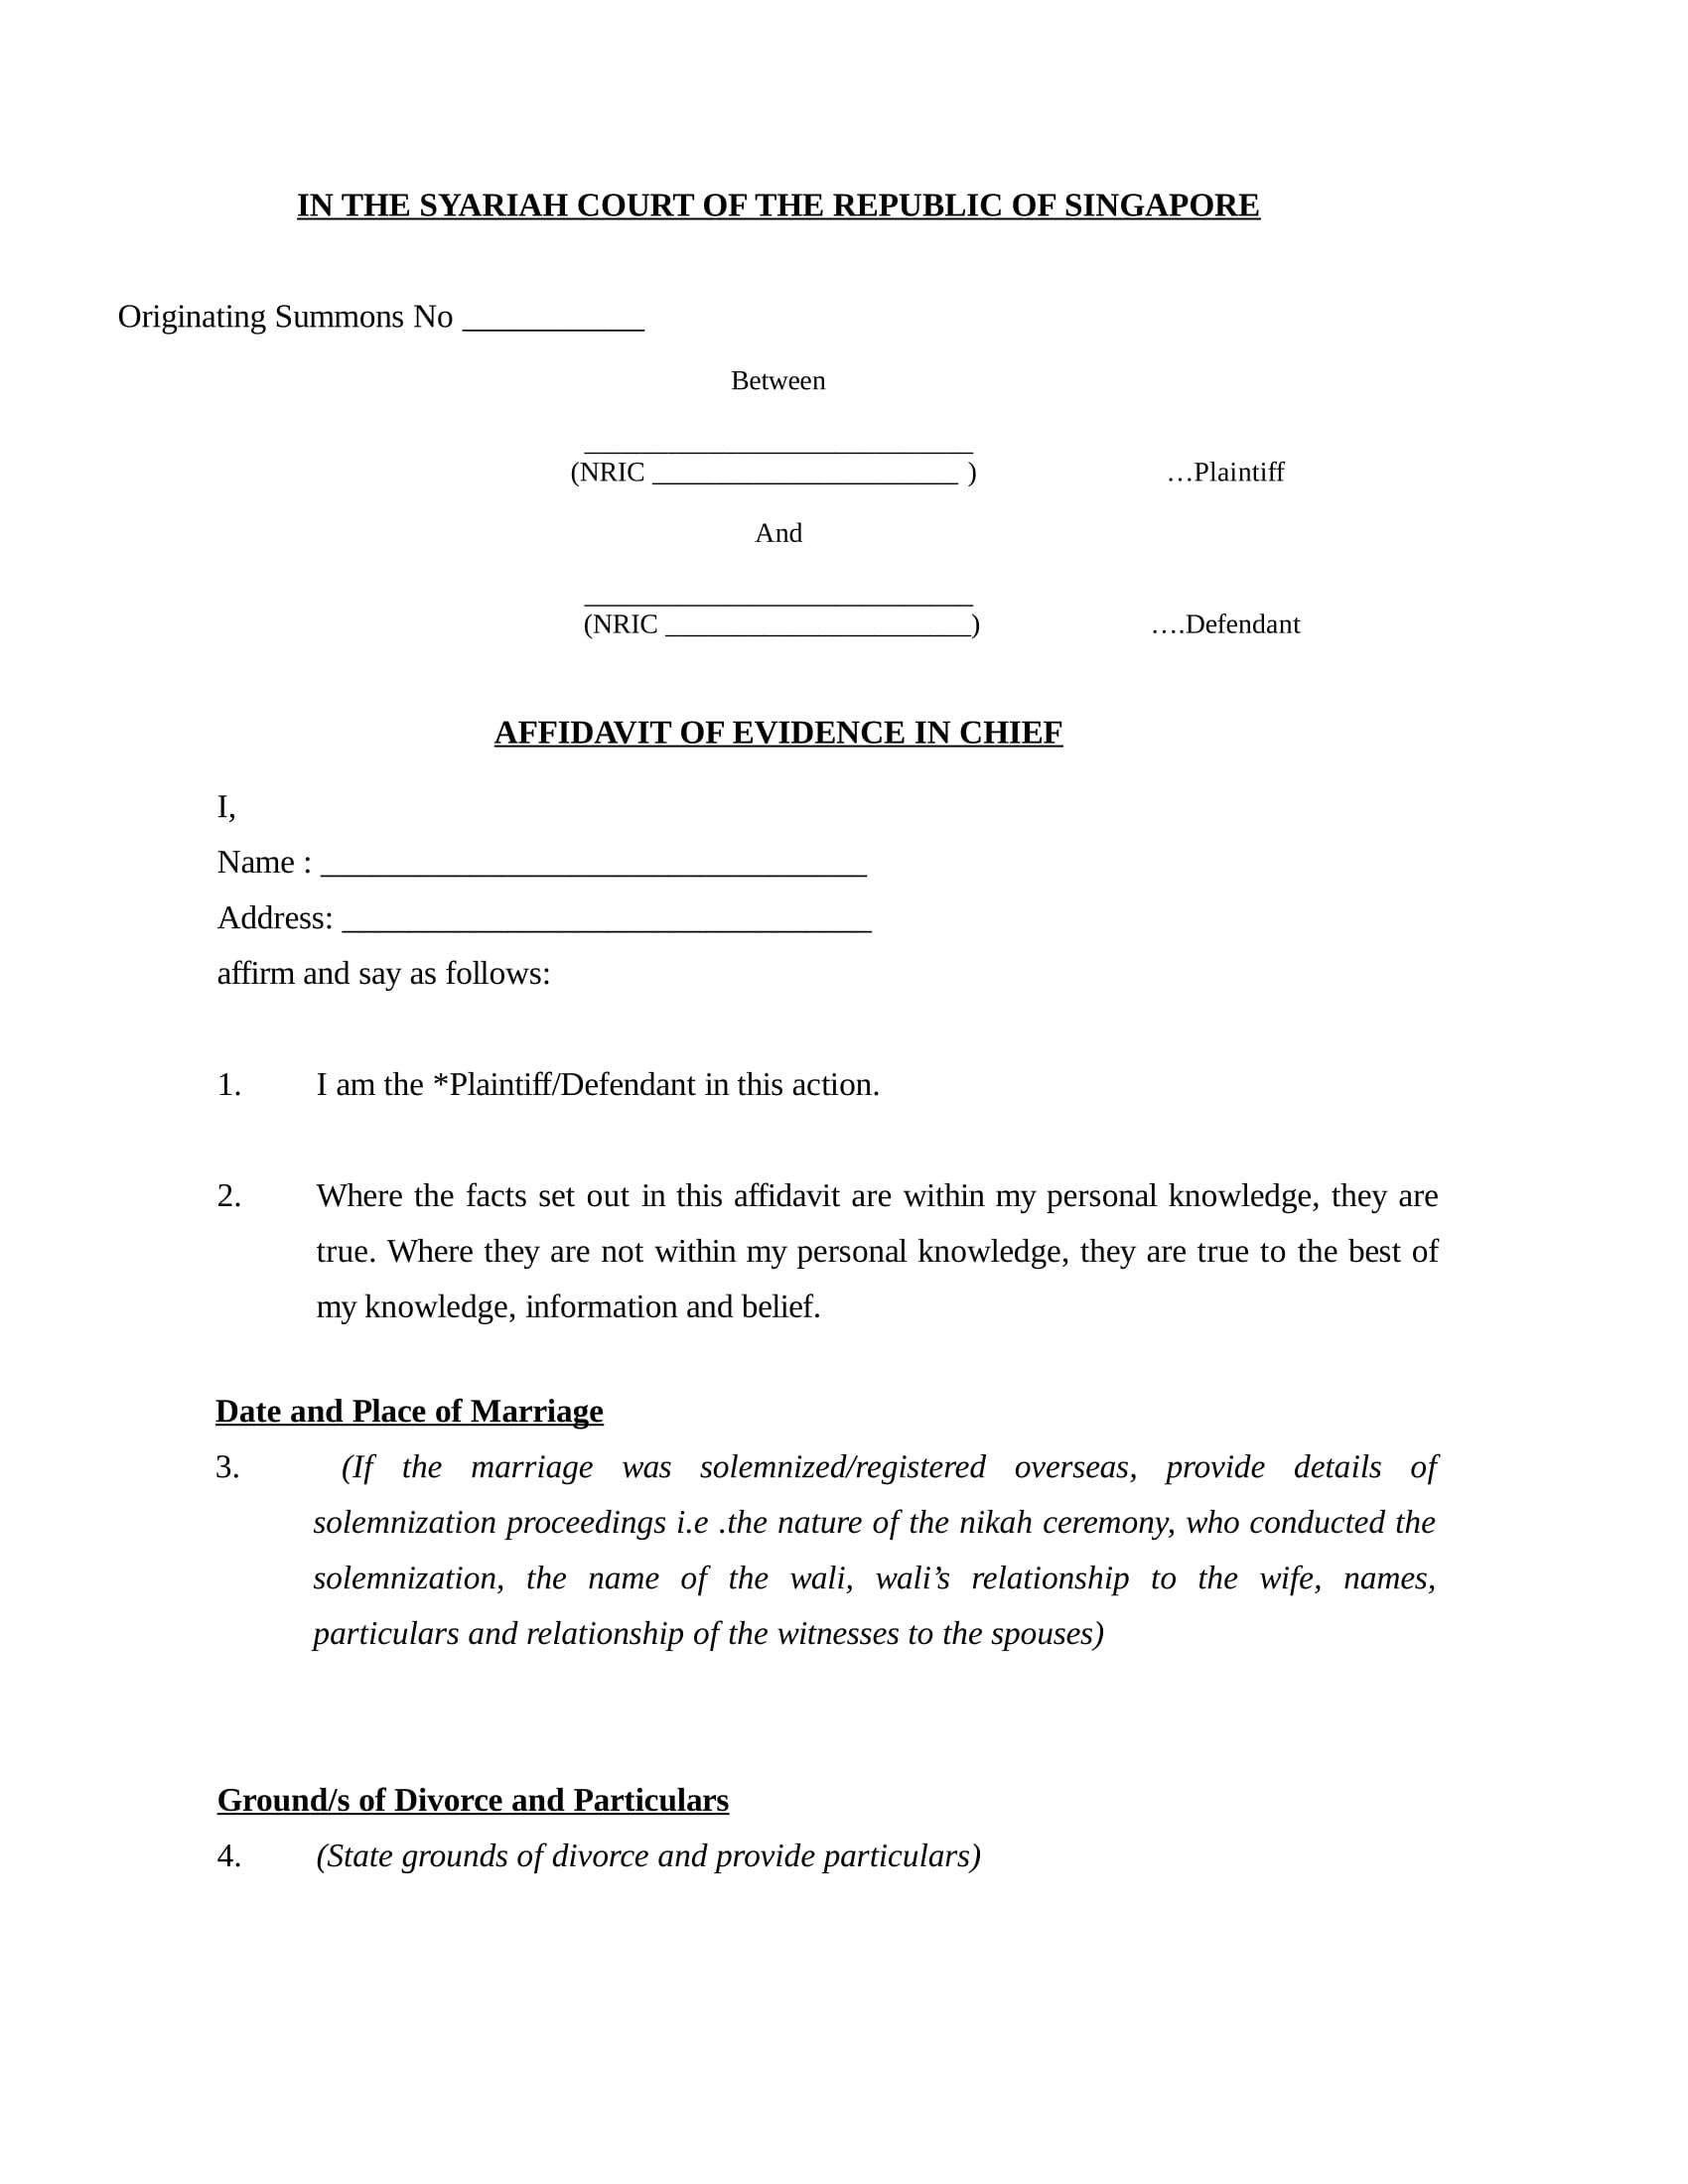 affidavit of evidence in chief format 03